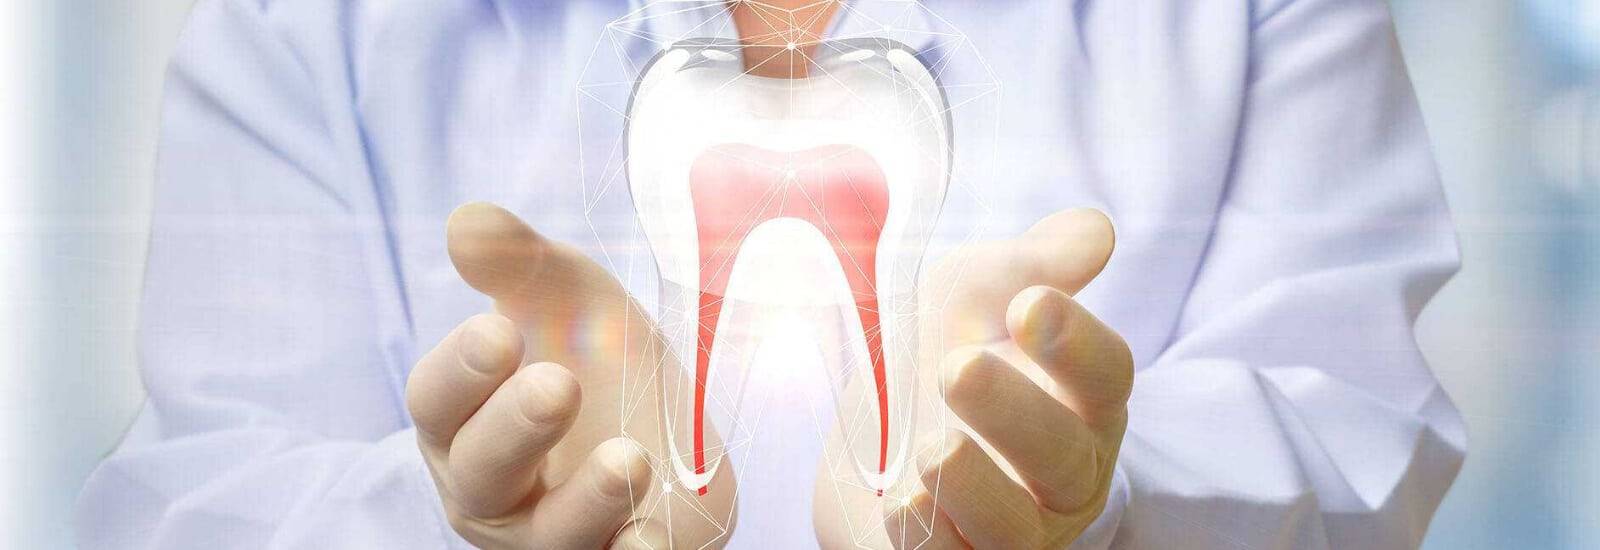 root-canal-therapy-pune